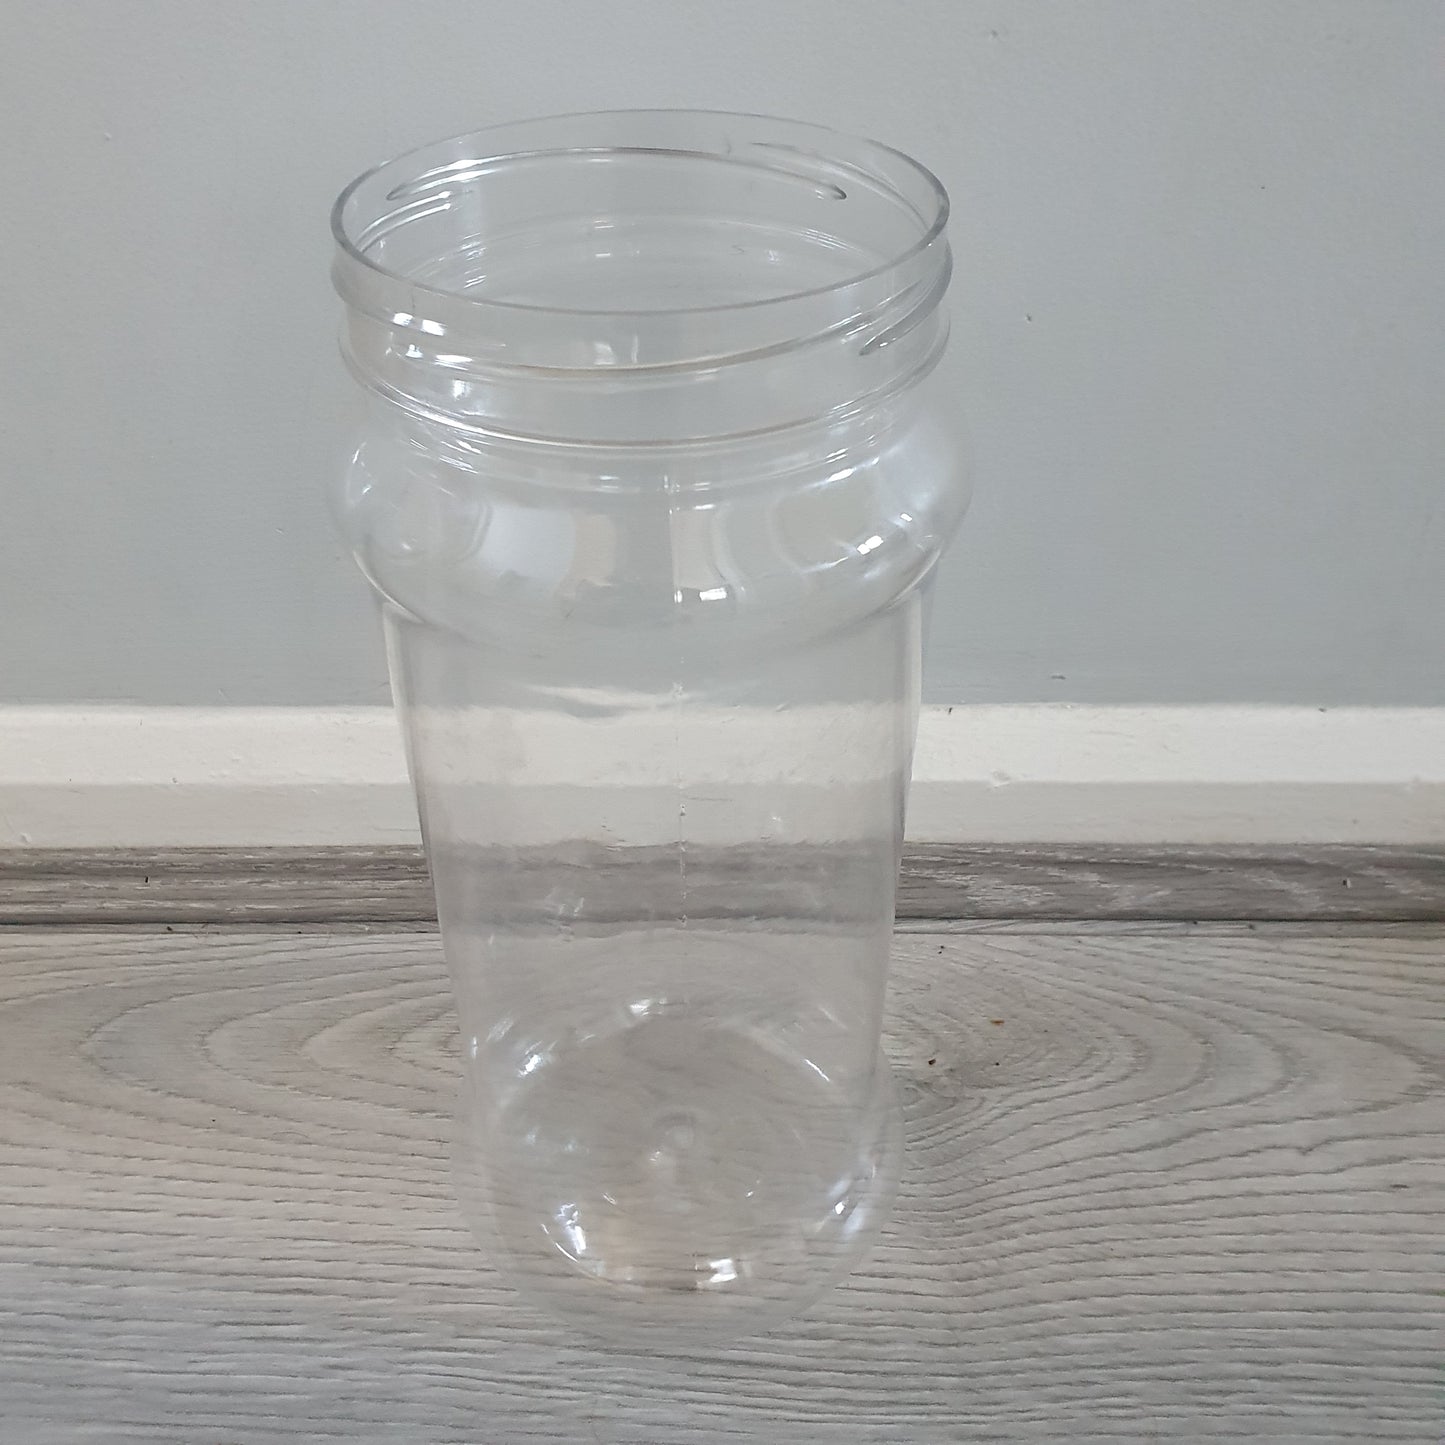 Clear 2.5l Plastic Jar only - 25cm tall with holes on the bottom